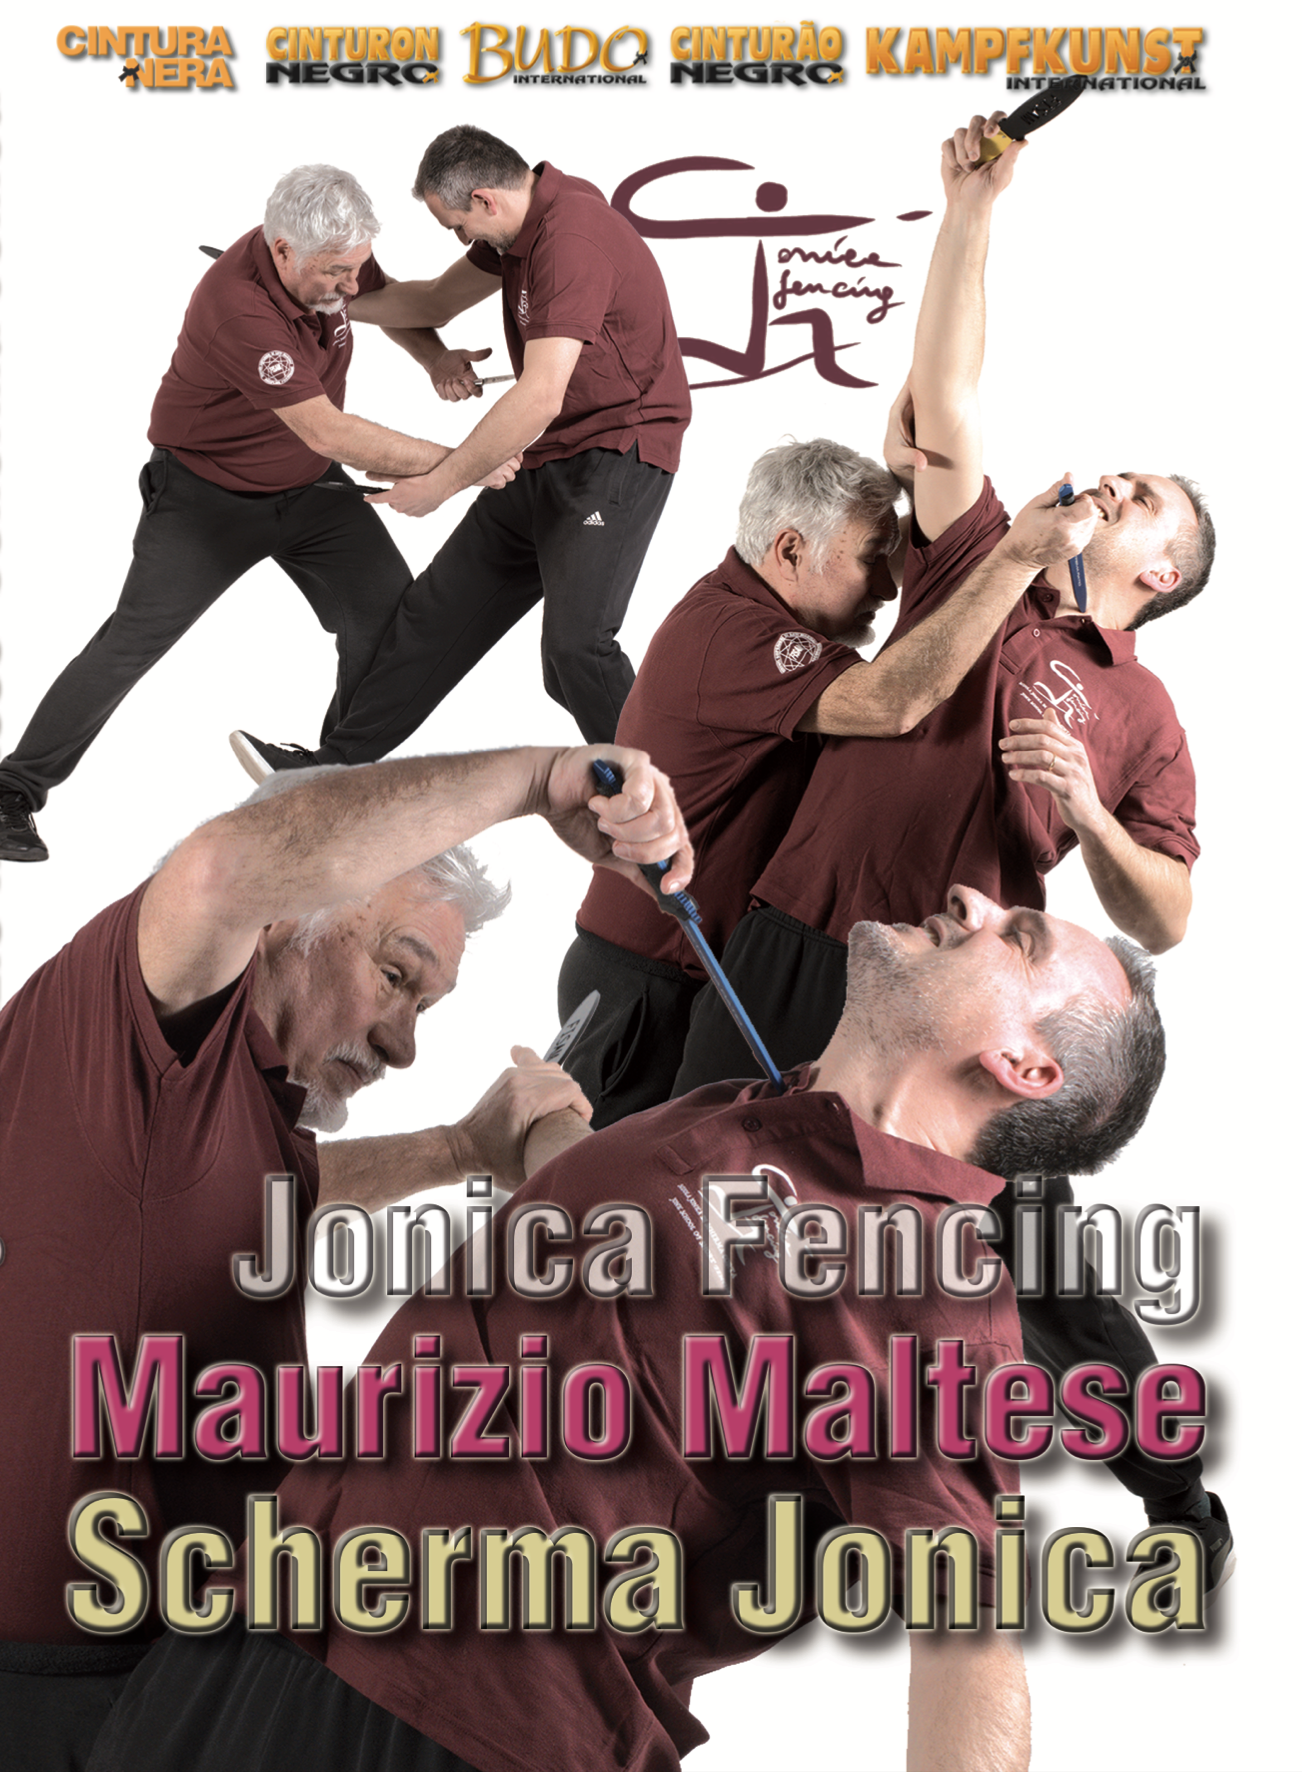 Ionian Fencing DVD by Maurizio Maltese